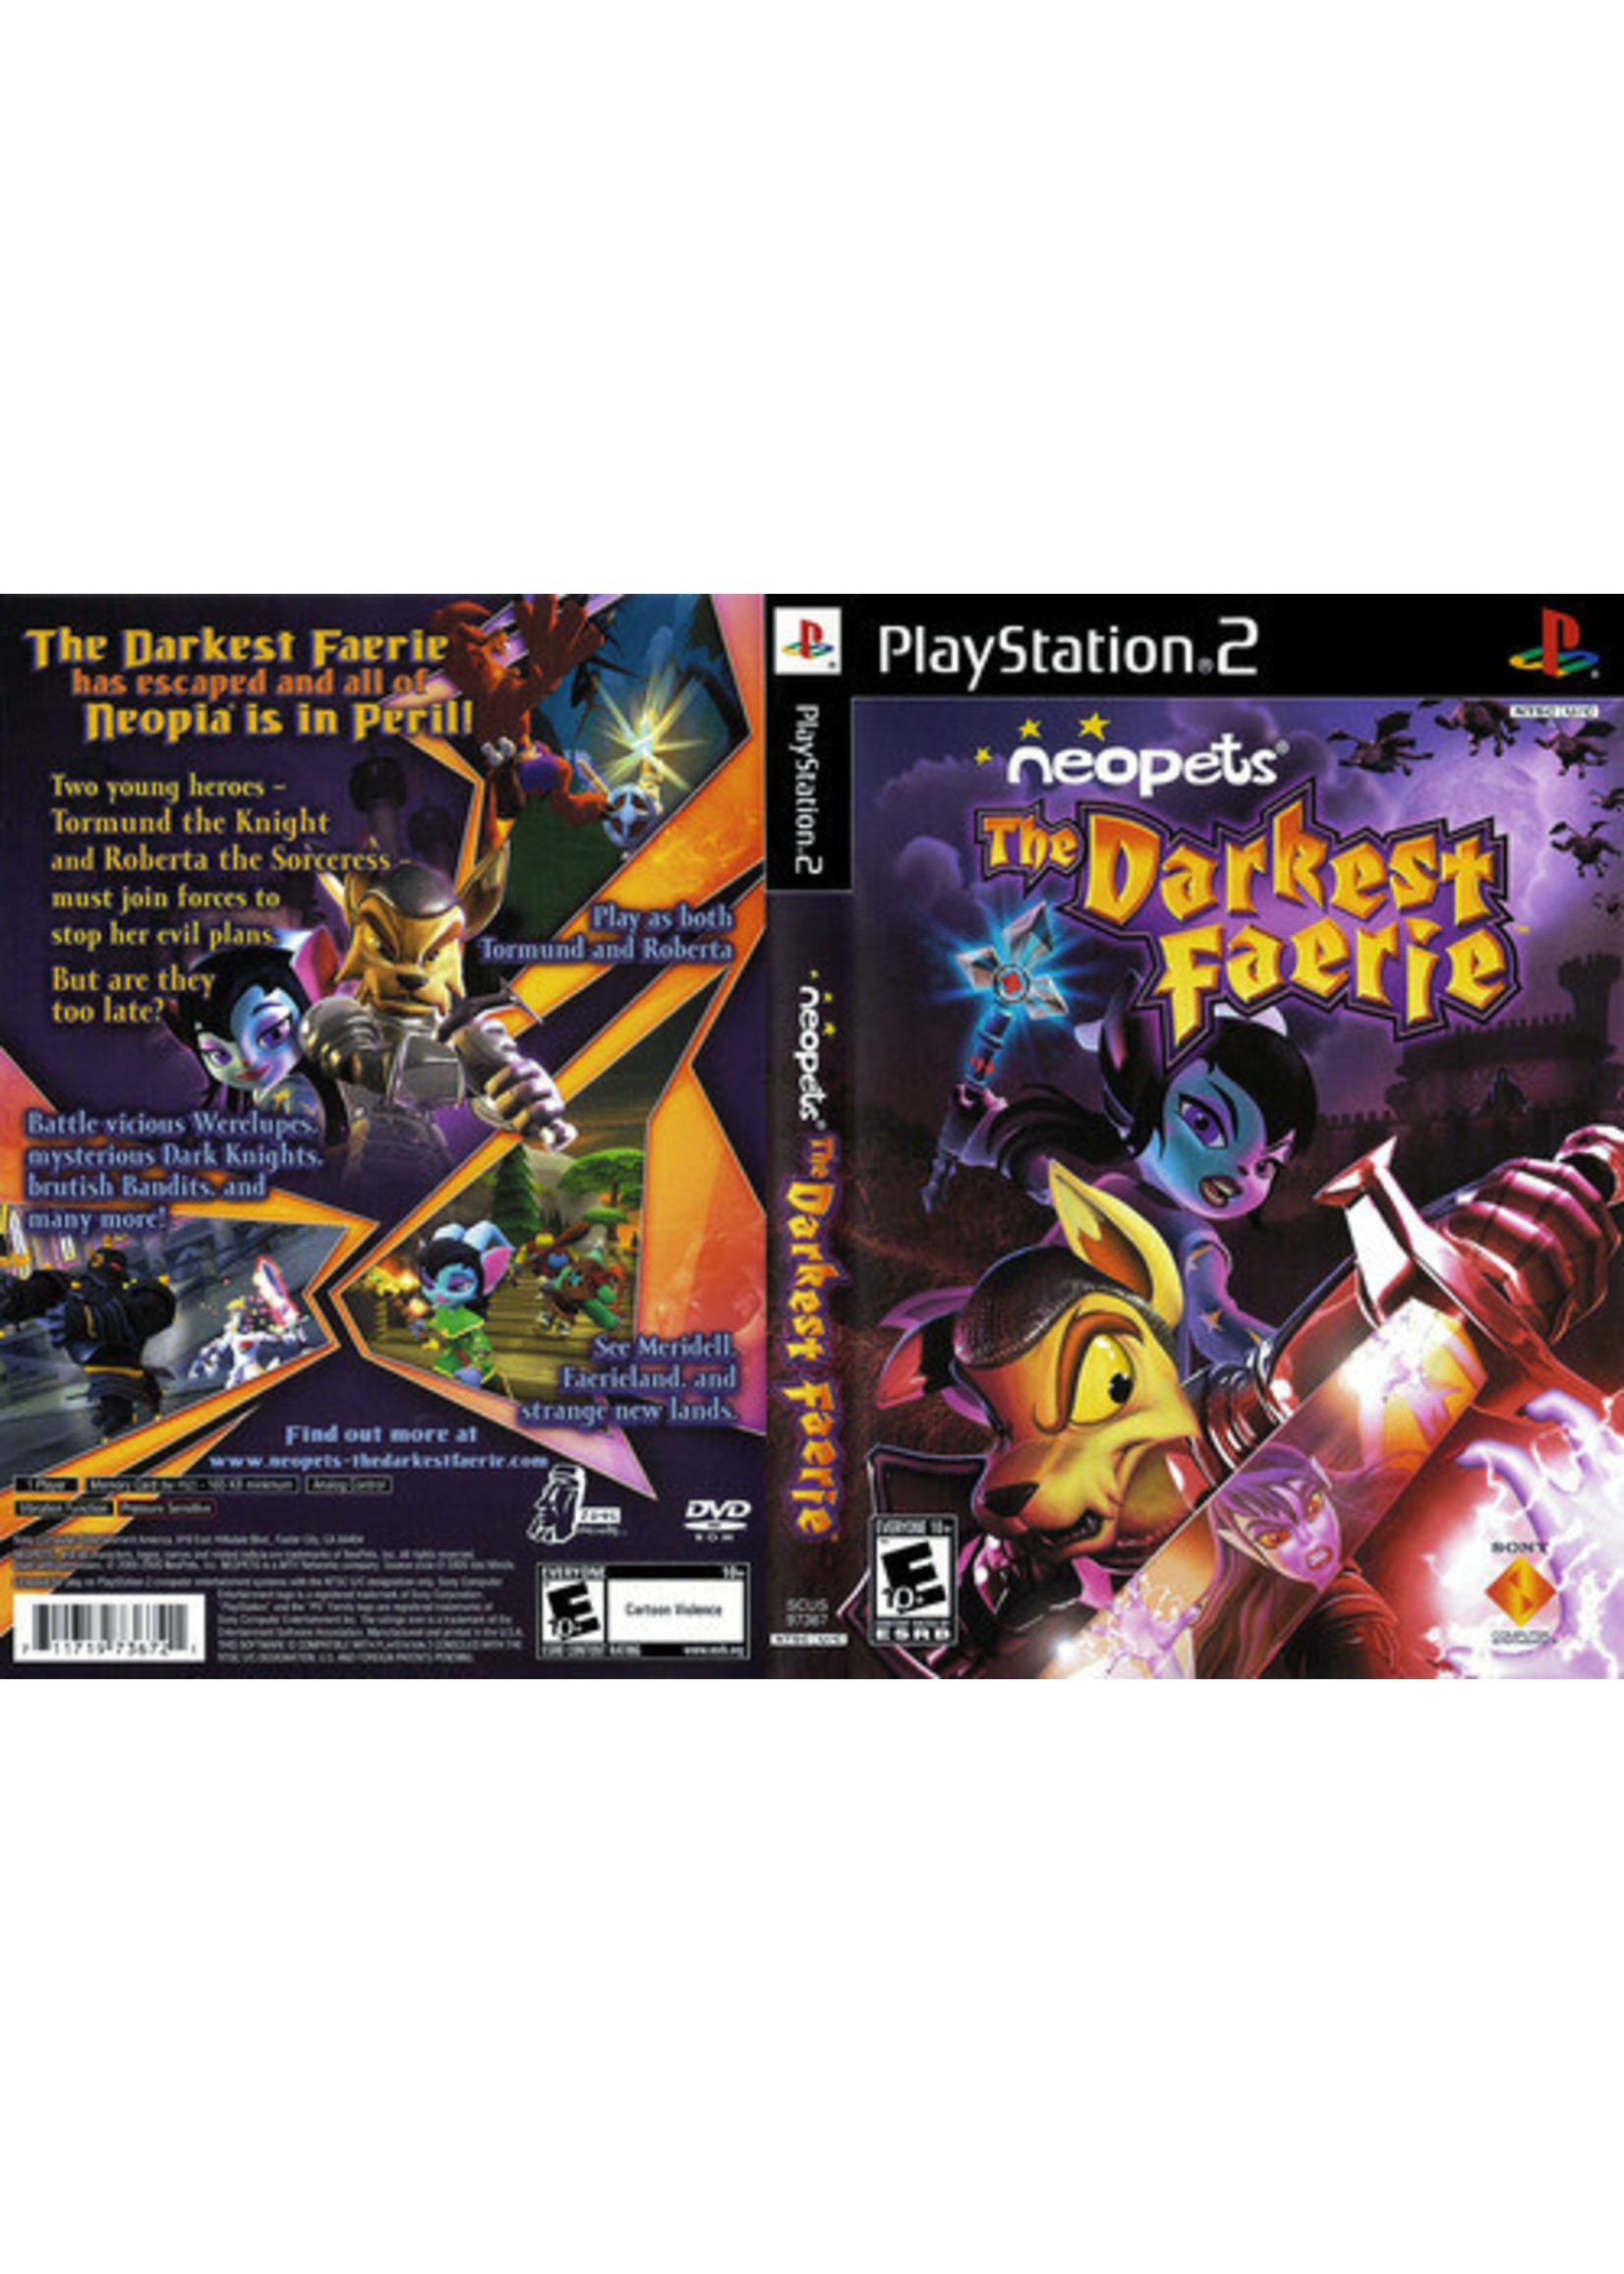 Sony Playstation 2 (PS2) NeoPets the Darkest Faerie